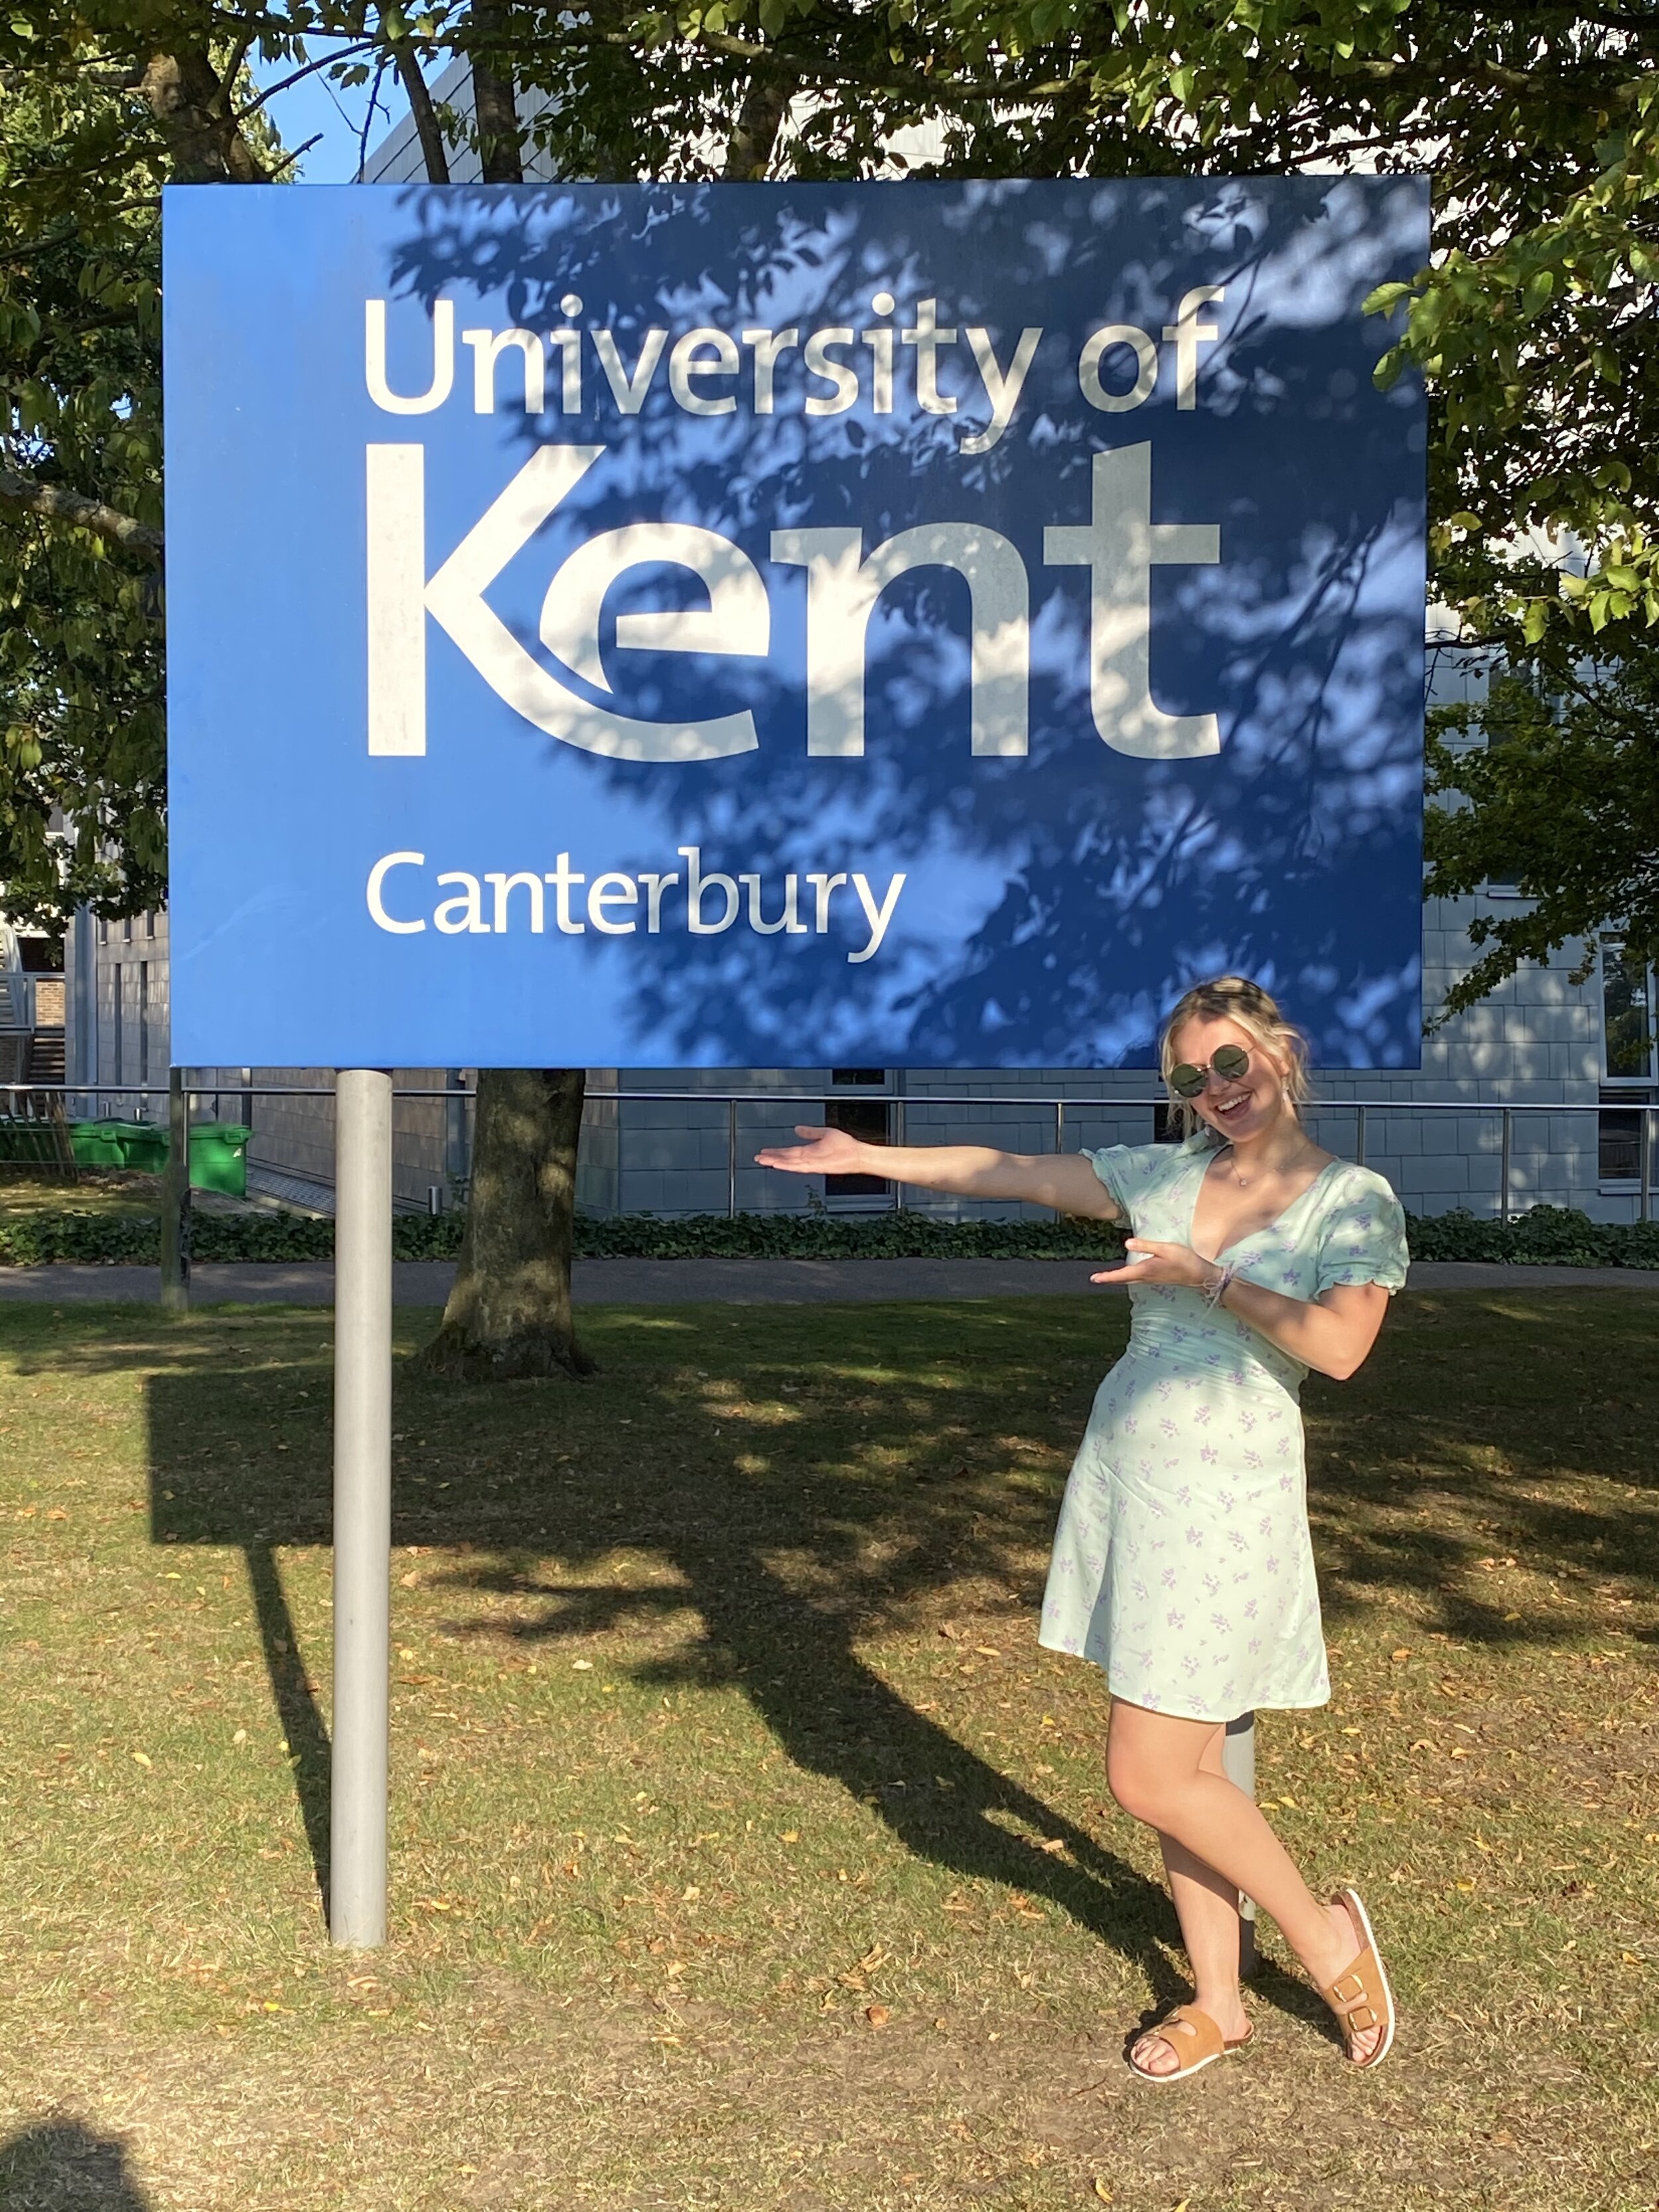 Graduating from University of Kent in 2020, Claudia can be seen in a short blue dress against the university's sign. Claudia Parker .jpeg